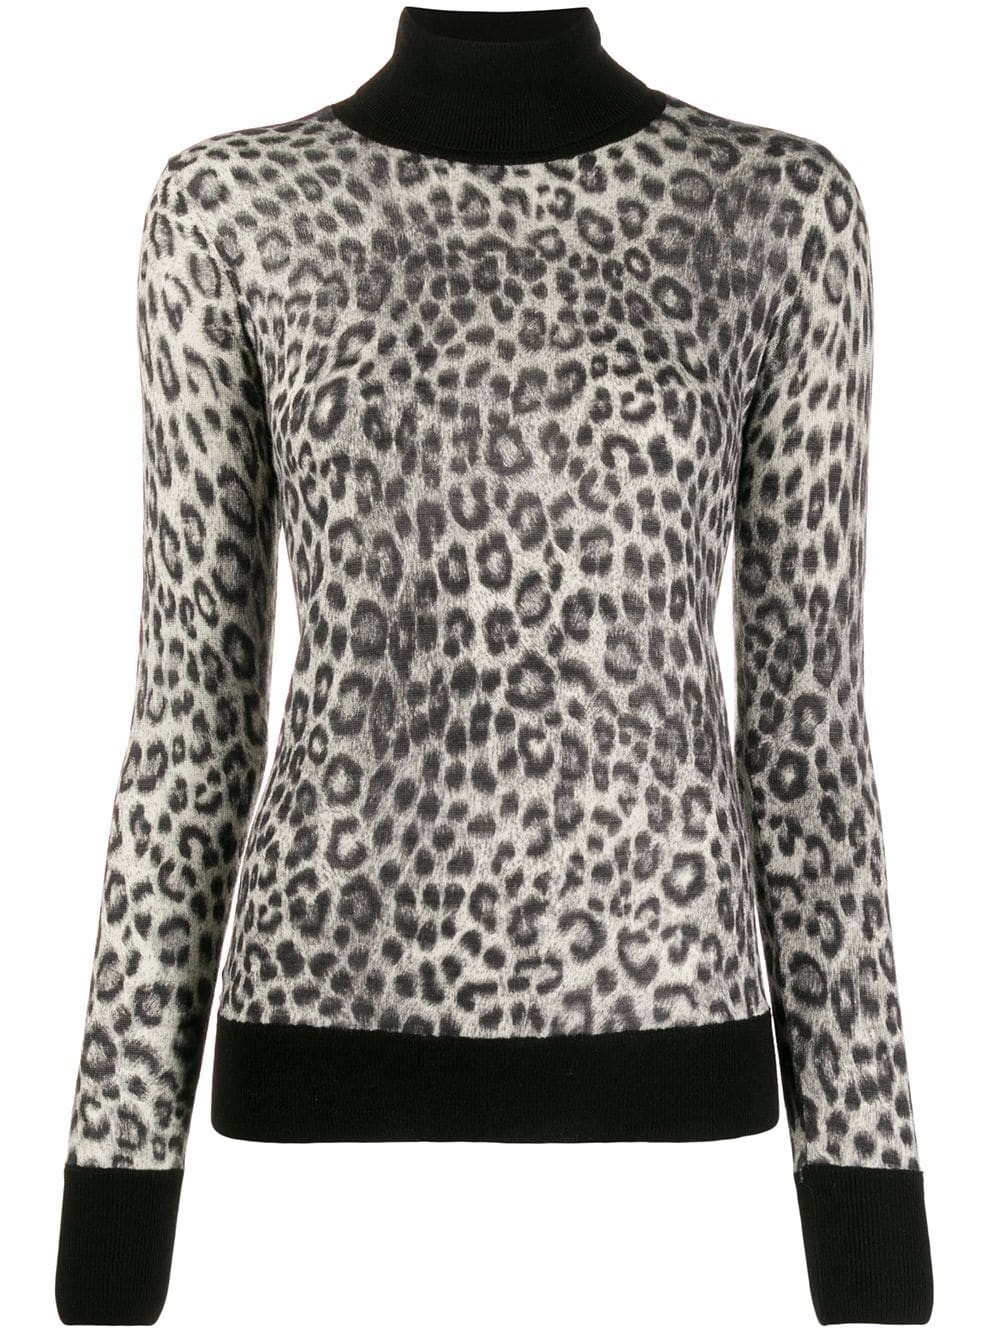 michael kors mk TURTLE NECK PULLOVER available on montiboutique.com - 31044